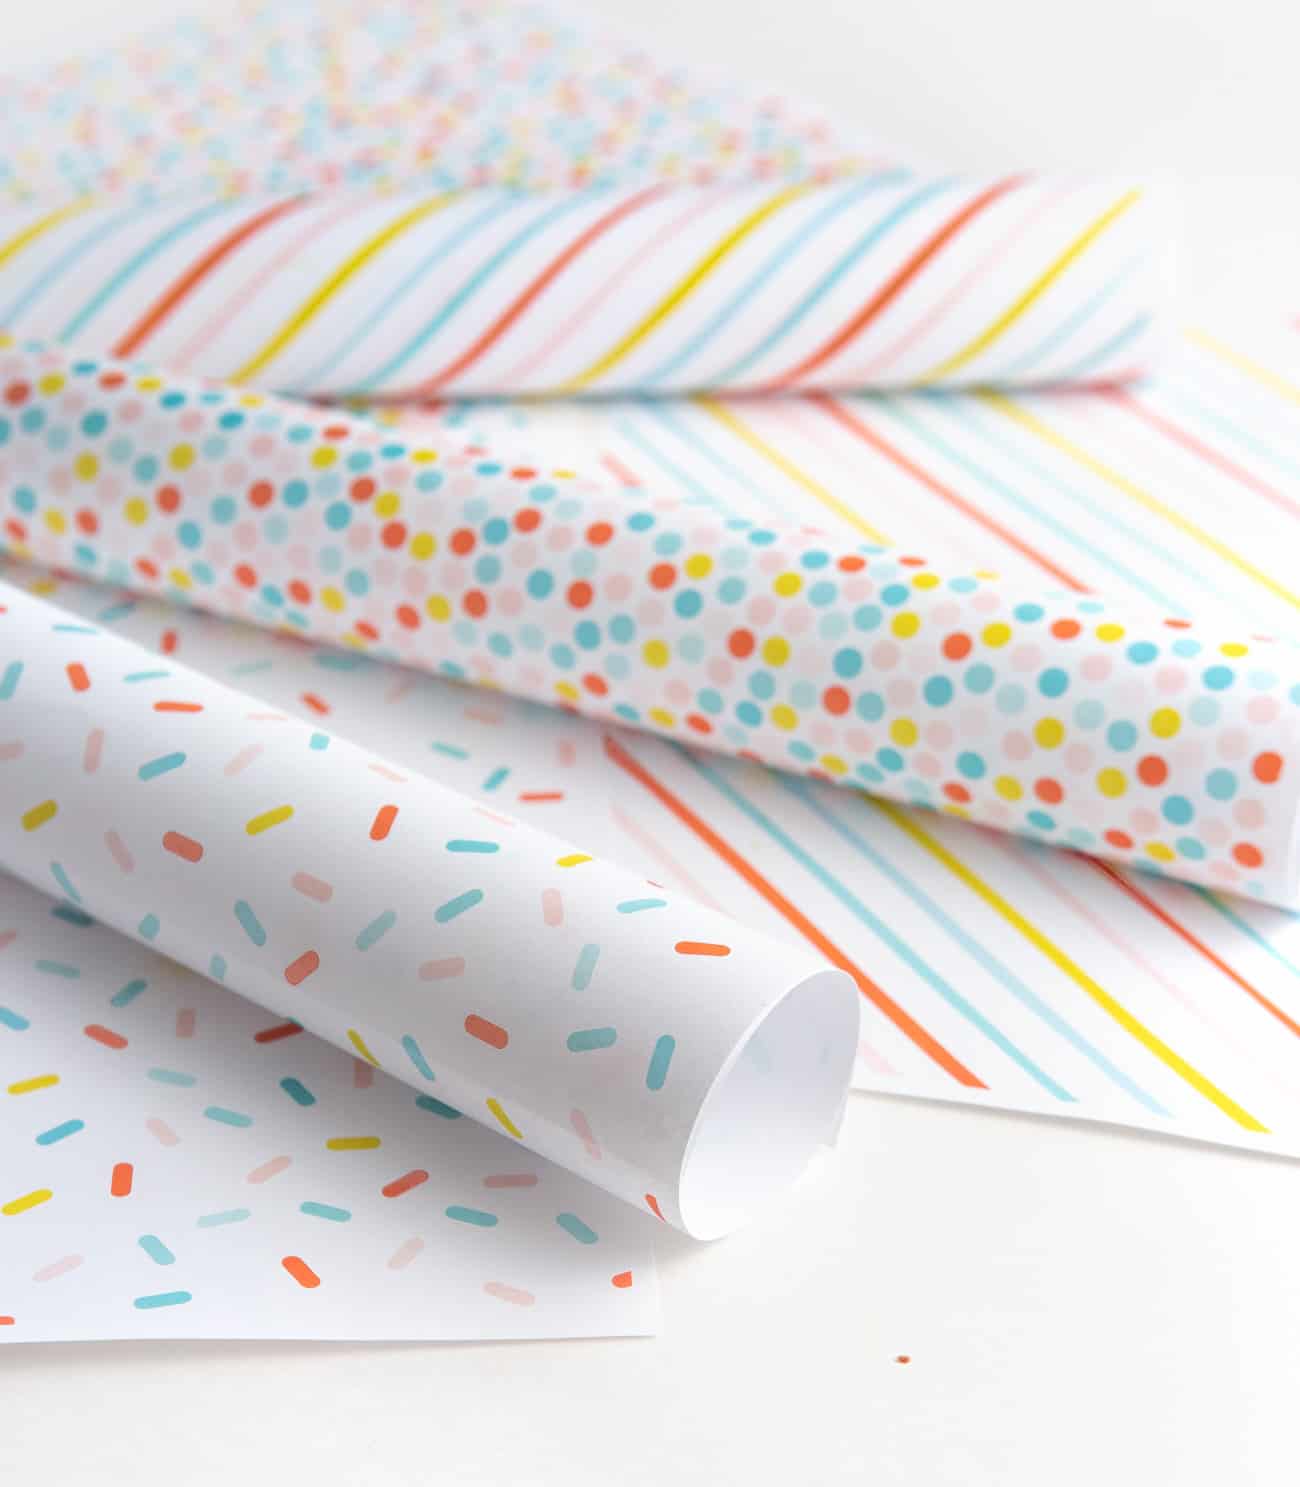 Free printable birthday wrapping paper gift box with blue yay tag and pink pom pom. Patterns include rainbow polka dot, rainbow sprinkle, and rainbow stripe.